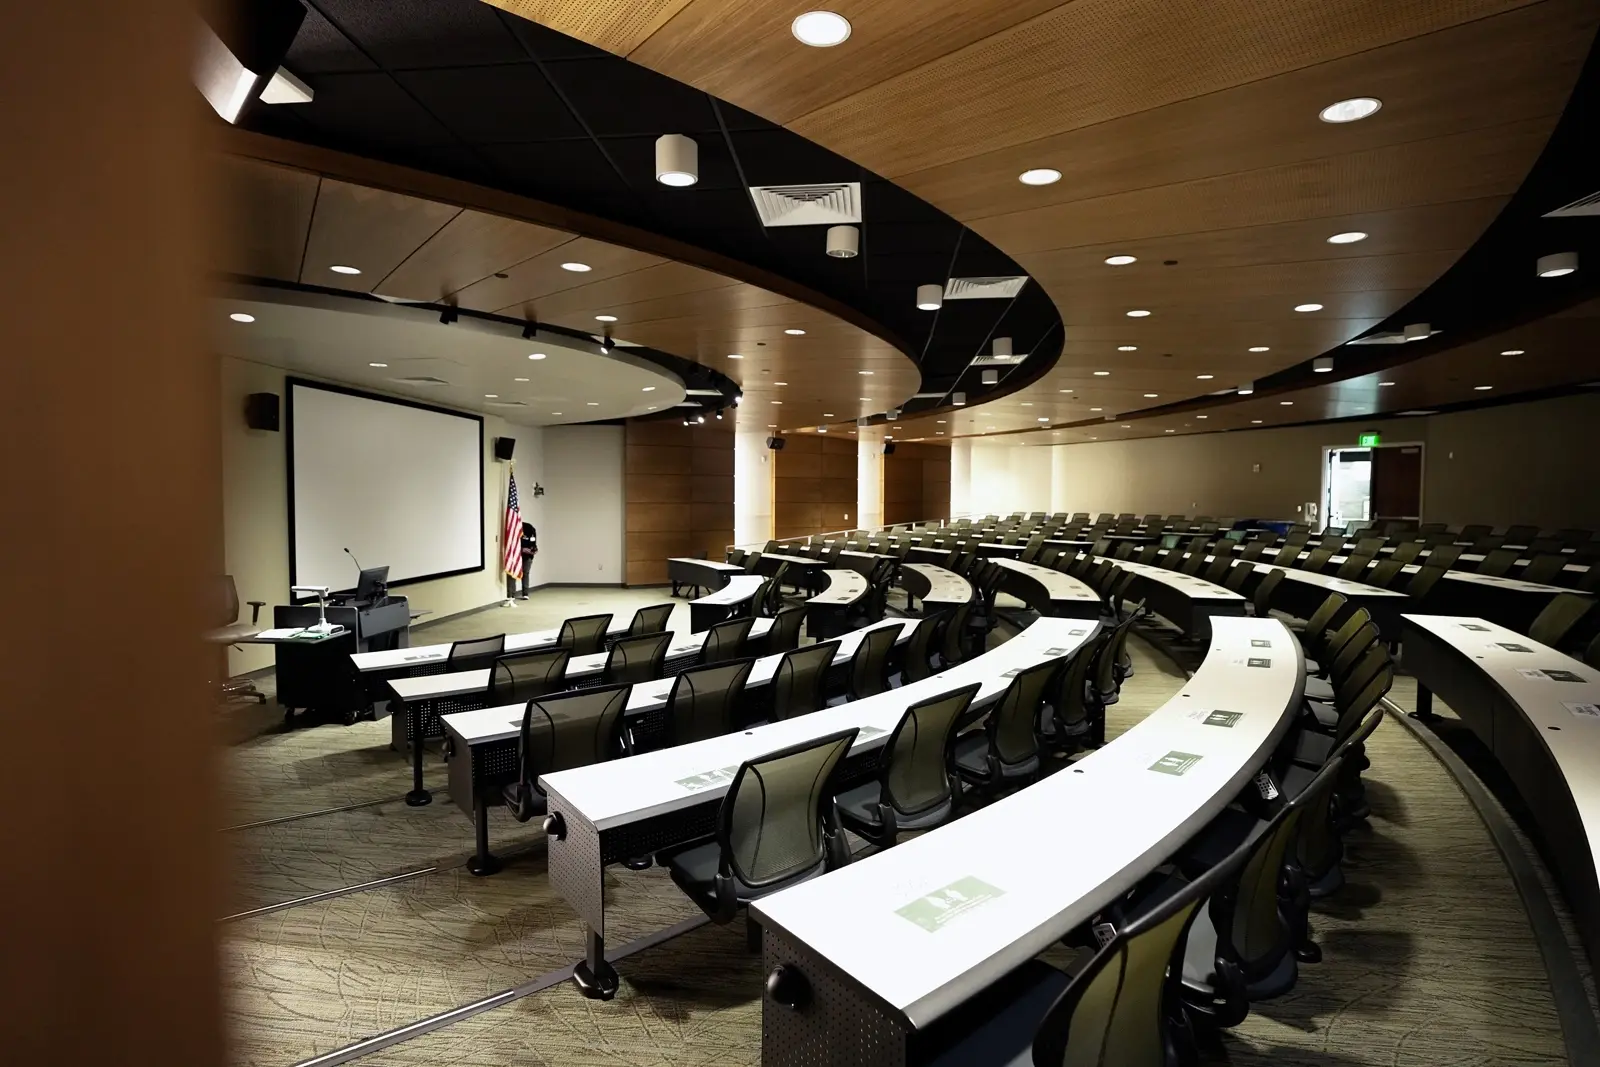 CAMLS A modern lecture hall with curved rows of white desks and green chairs. The room features a large screen at the front, ceiling lights, a podium, and American flags. The wooden walls and ceiling give the space a warm, professional look.